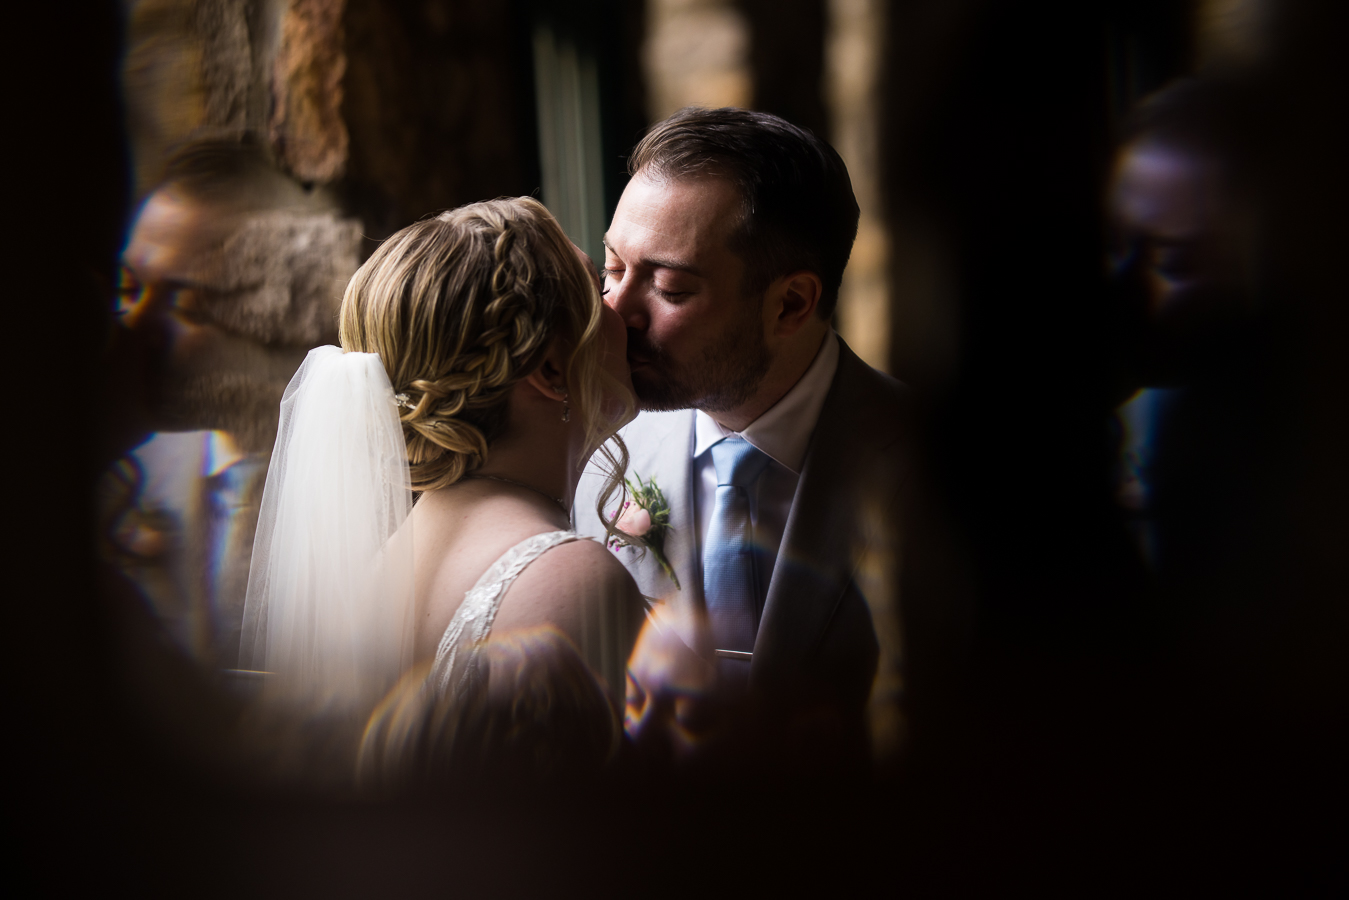 creative Holly Hedge Estate Wedding Photographer, rhinehart photography, captures this unique, creative romantic portrait image of the couple as they share a kiss caught through the glass on the piano 